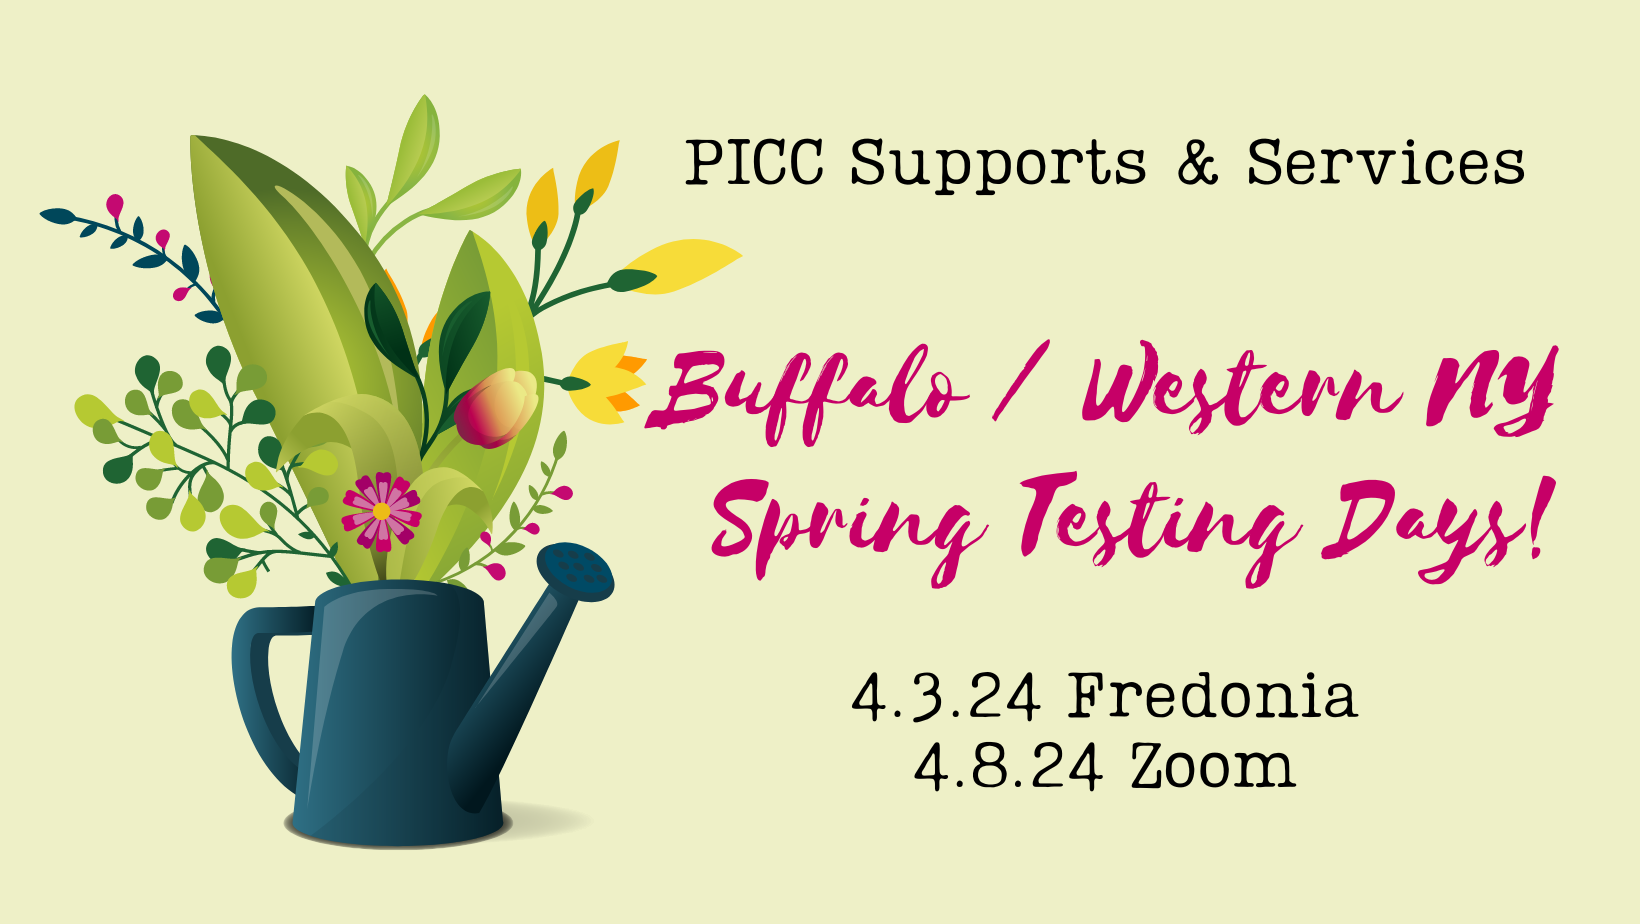 PICC SUPPORTS & SERVICES Buffalo / Western NY SPRING Testing Days